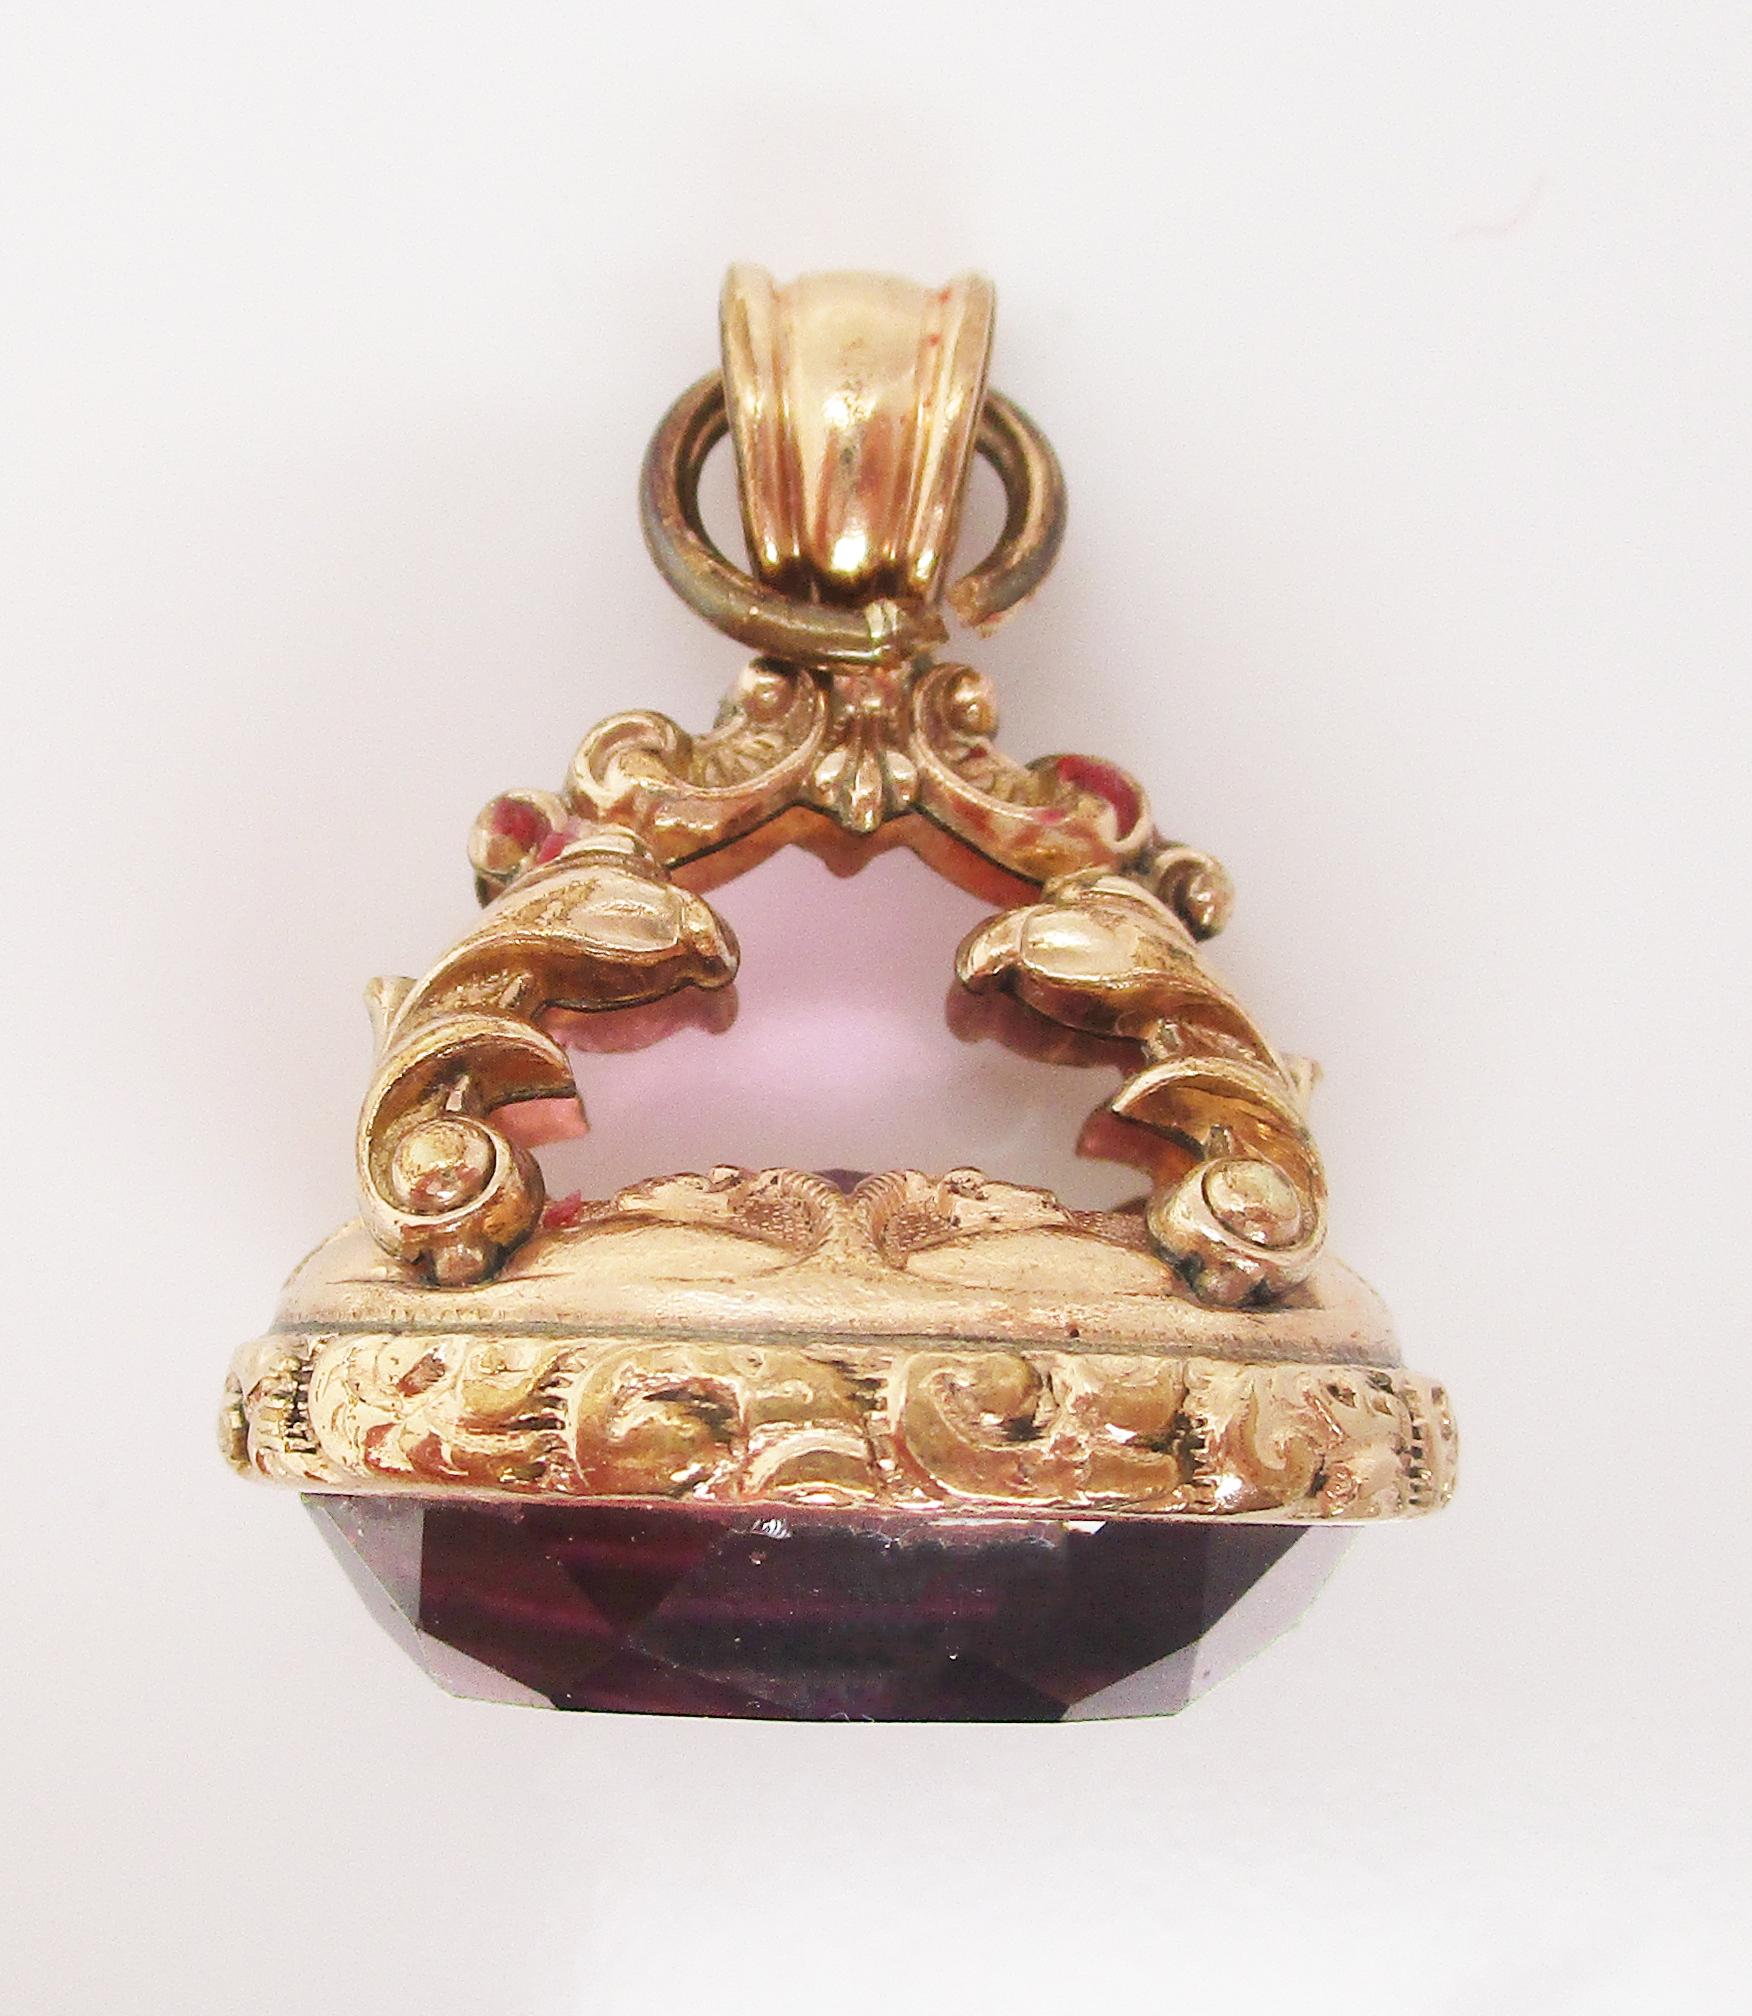 This stunning Georgian pendant is from 1840 and features bright gold and a great amethyst! The fine details of the charm curl upward from the base in the form of an arching cathedral element, subtle milgraining, and textured engraving. The detail in